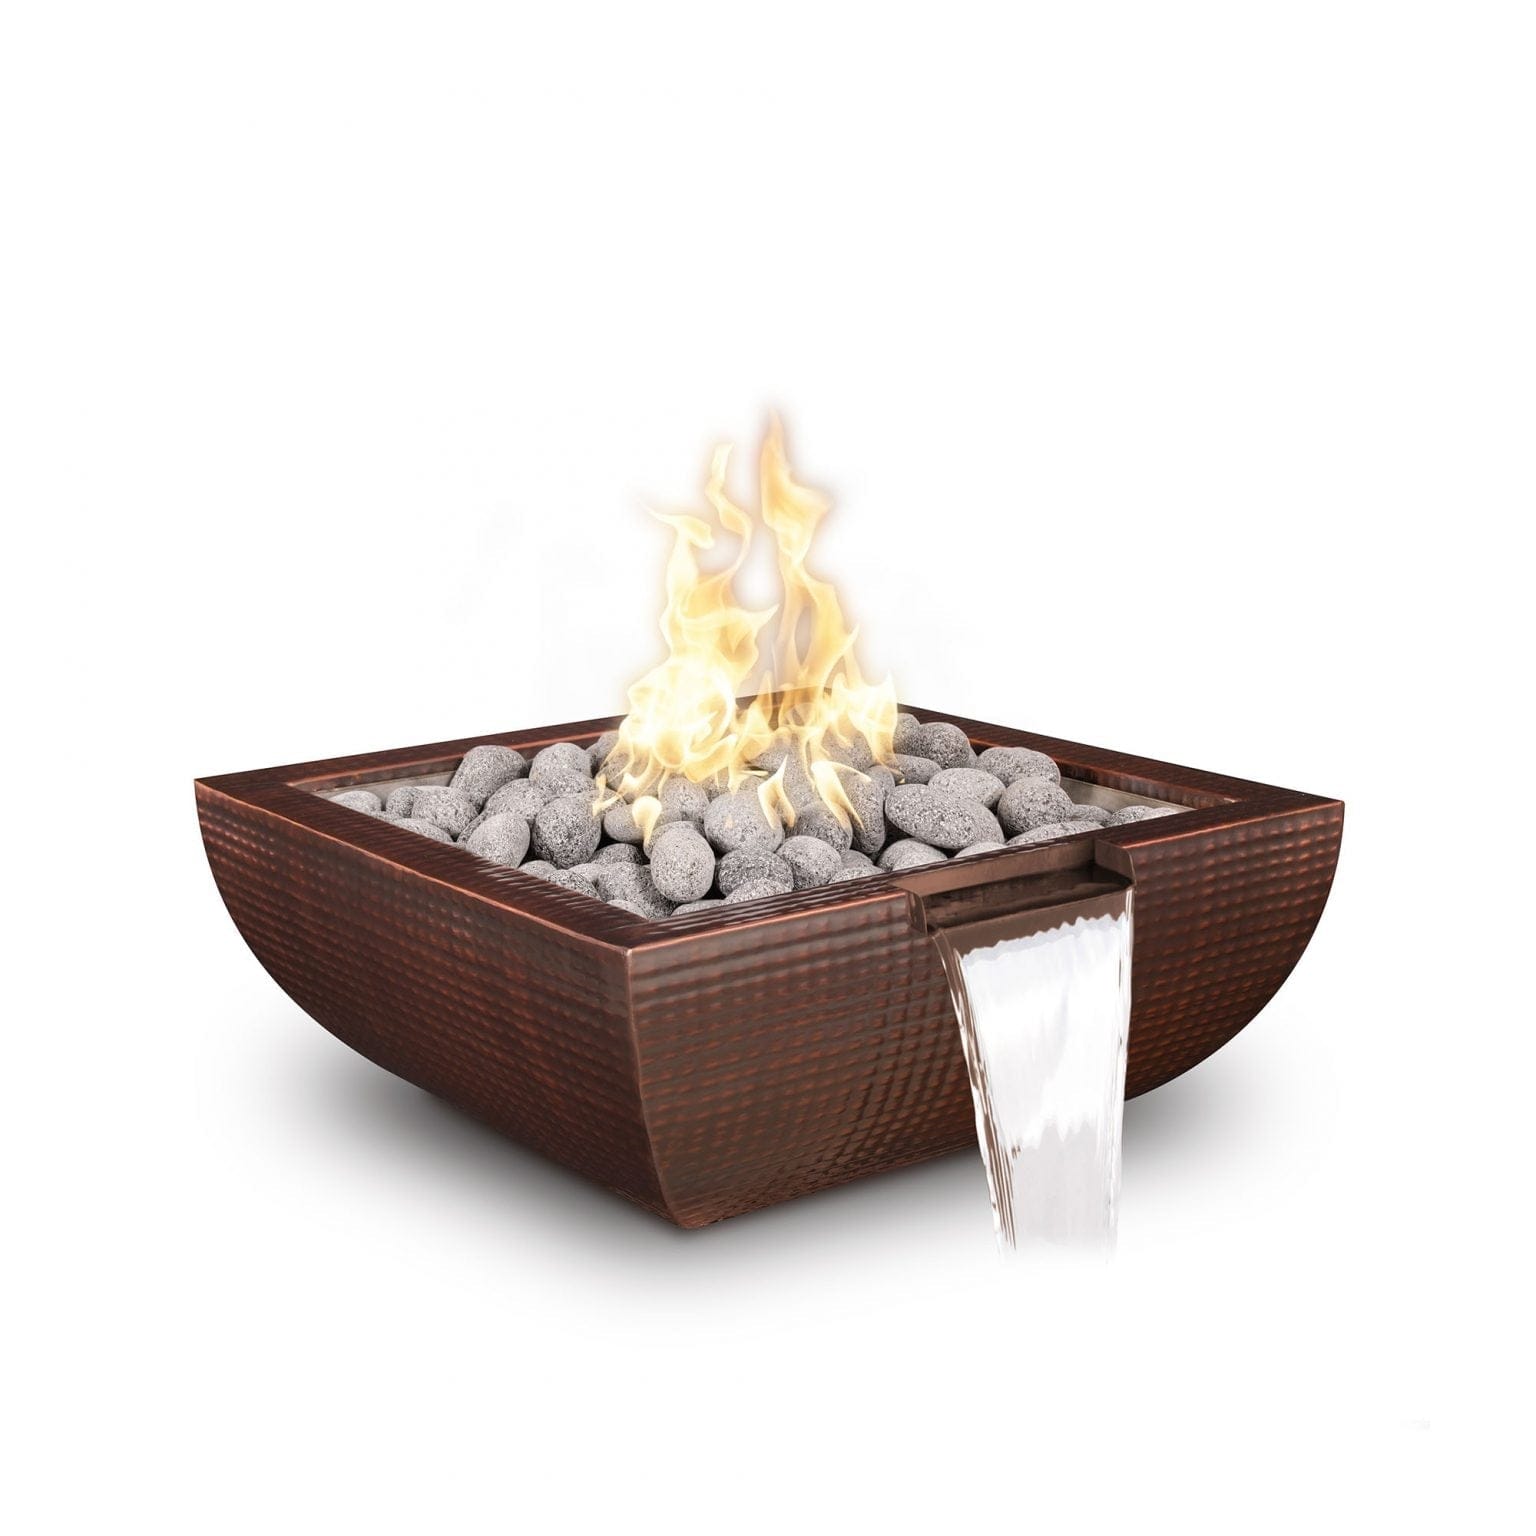 The Outdoor Plus Fire & Water Bowl 24" / Match Lit The Outdoor Plus Avalon Fire & Water Bowl | Hammered Patina Copper OPT-24AVCPFW